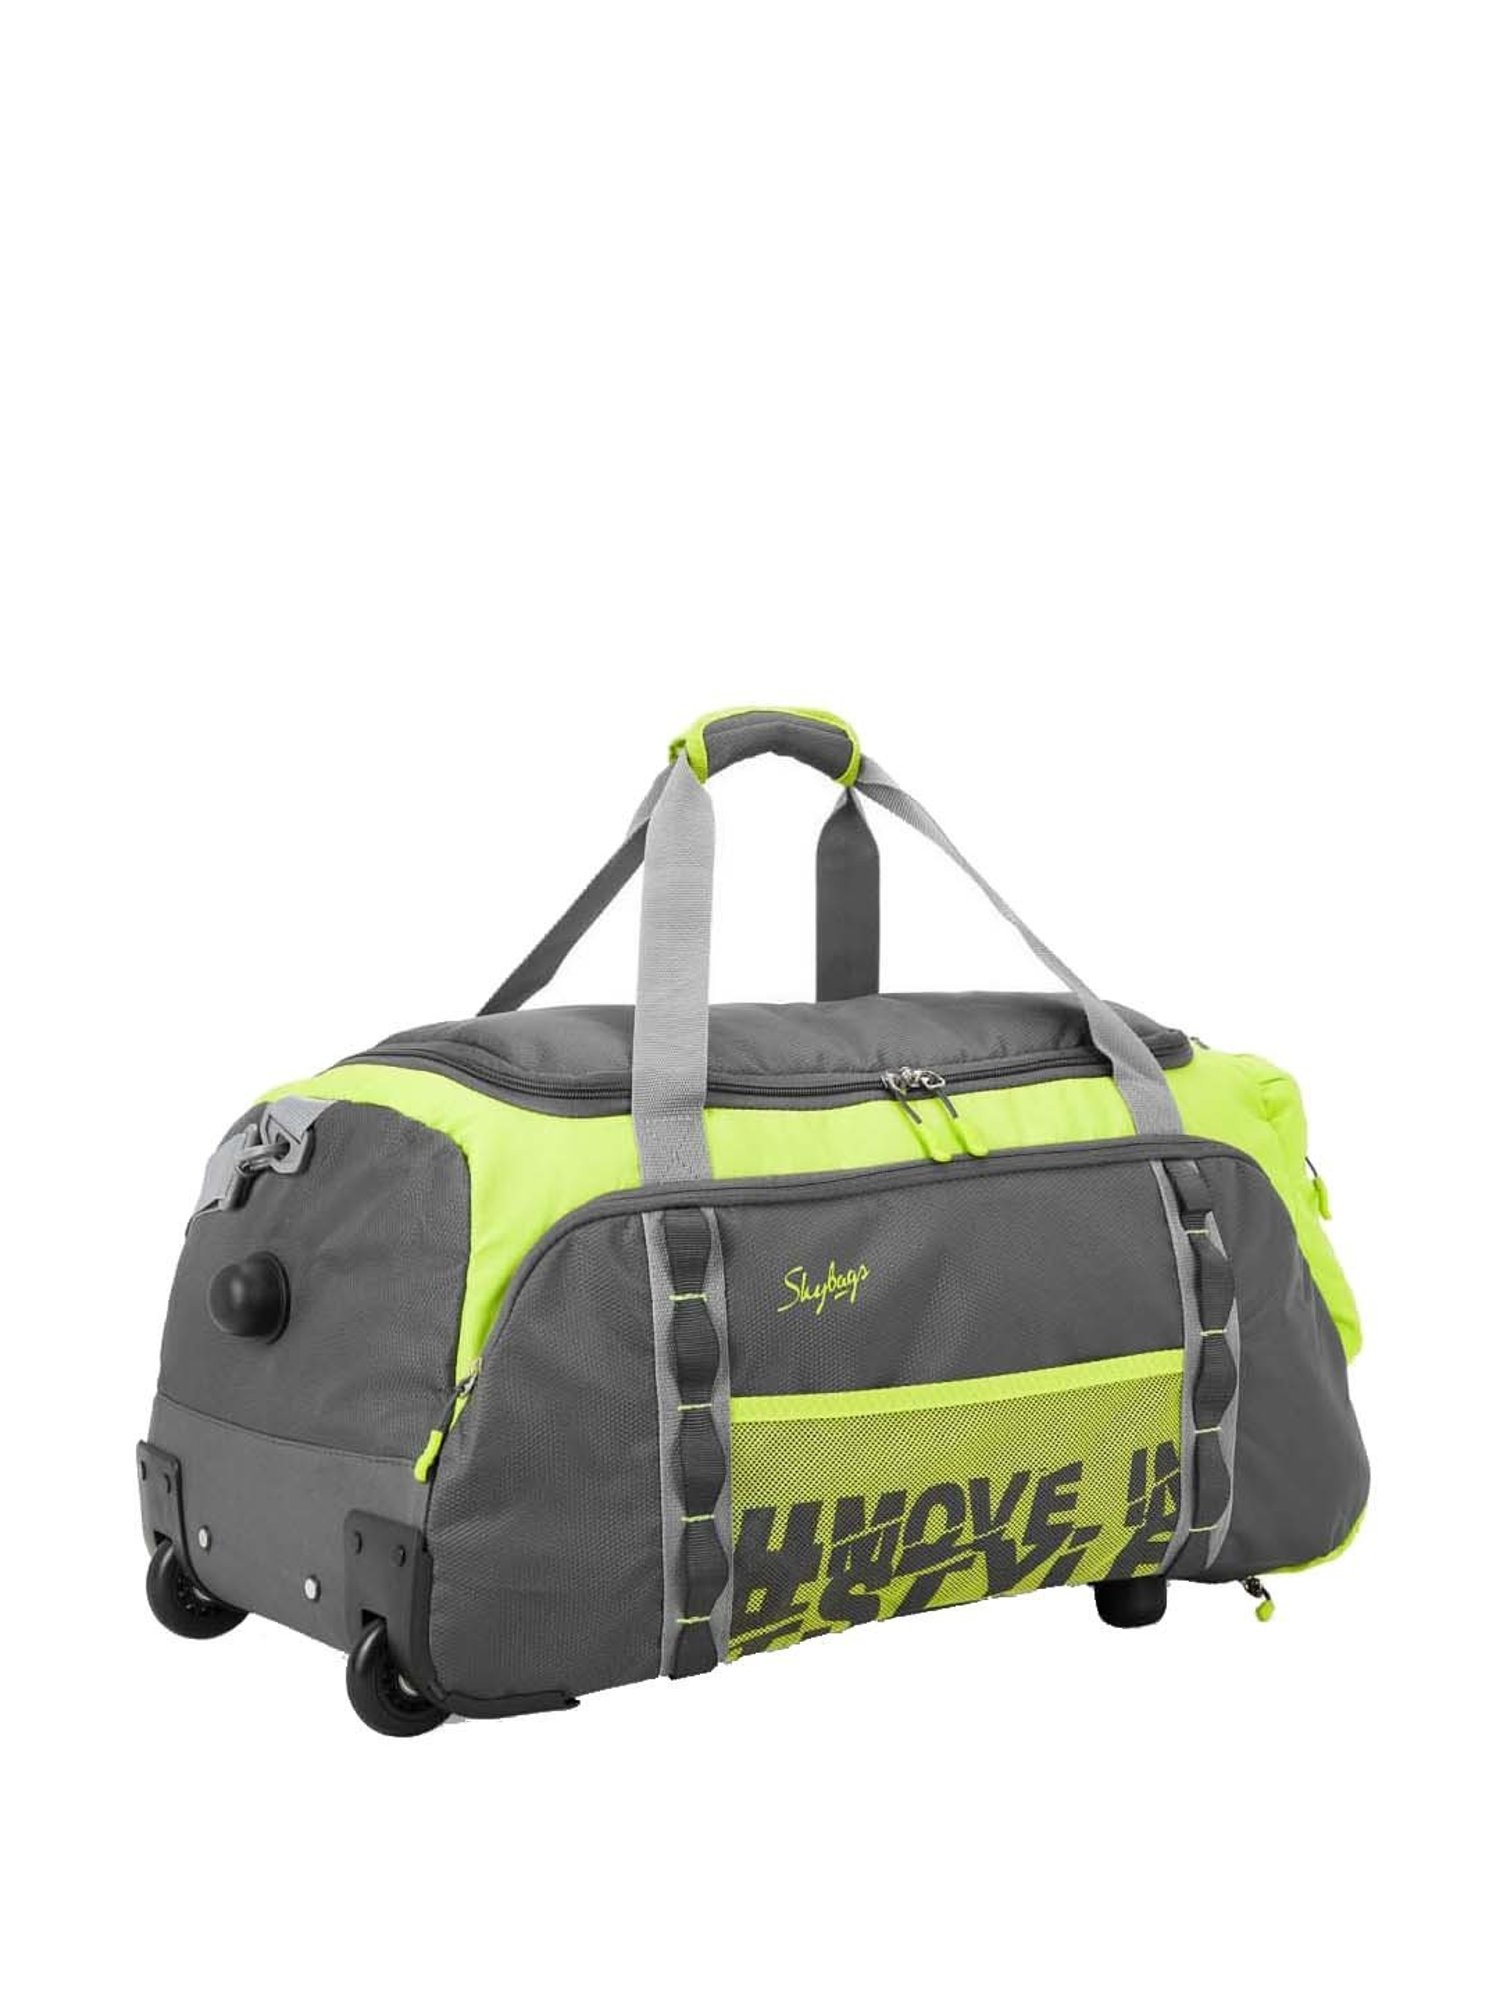 Nylon Skybags Duffle Bag at Rs 1200 in Kochi | ID: 20257597373